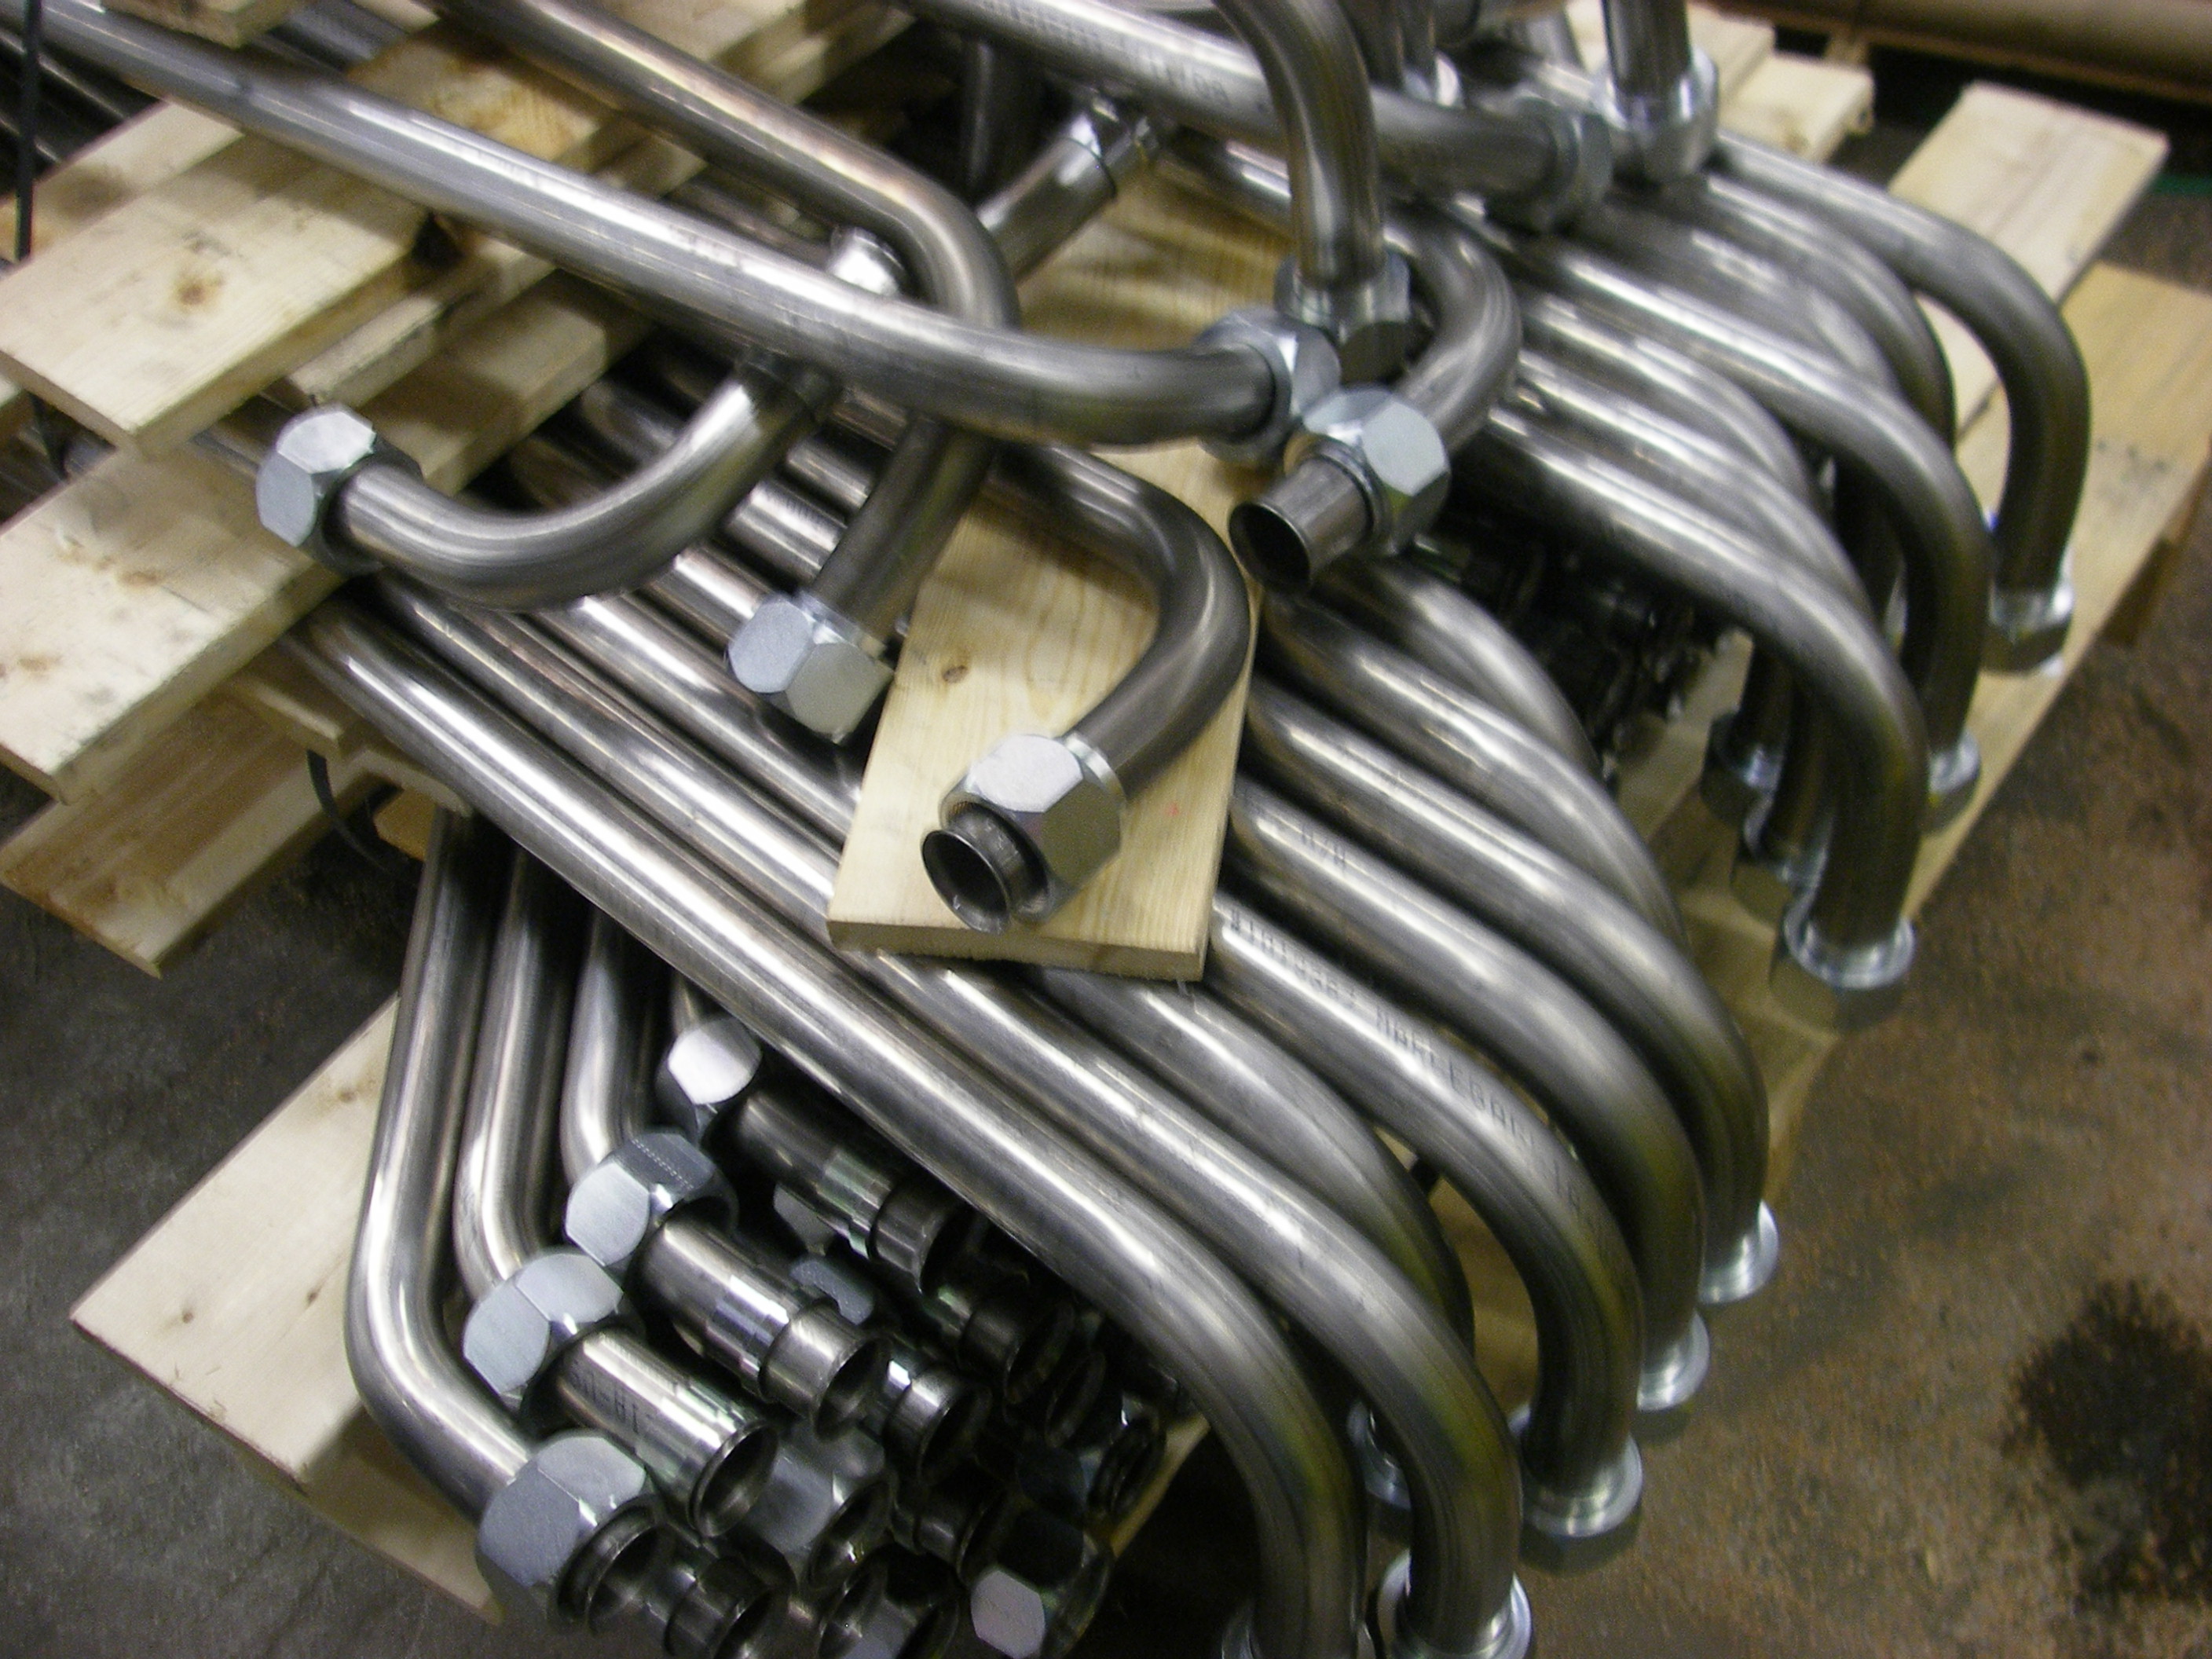 Bending Stainless Steel Tubing: A Few Considerations - The Chicago Curve